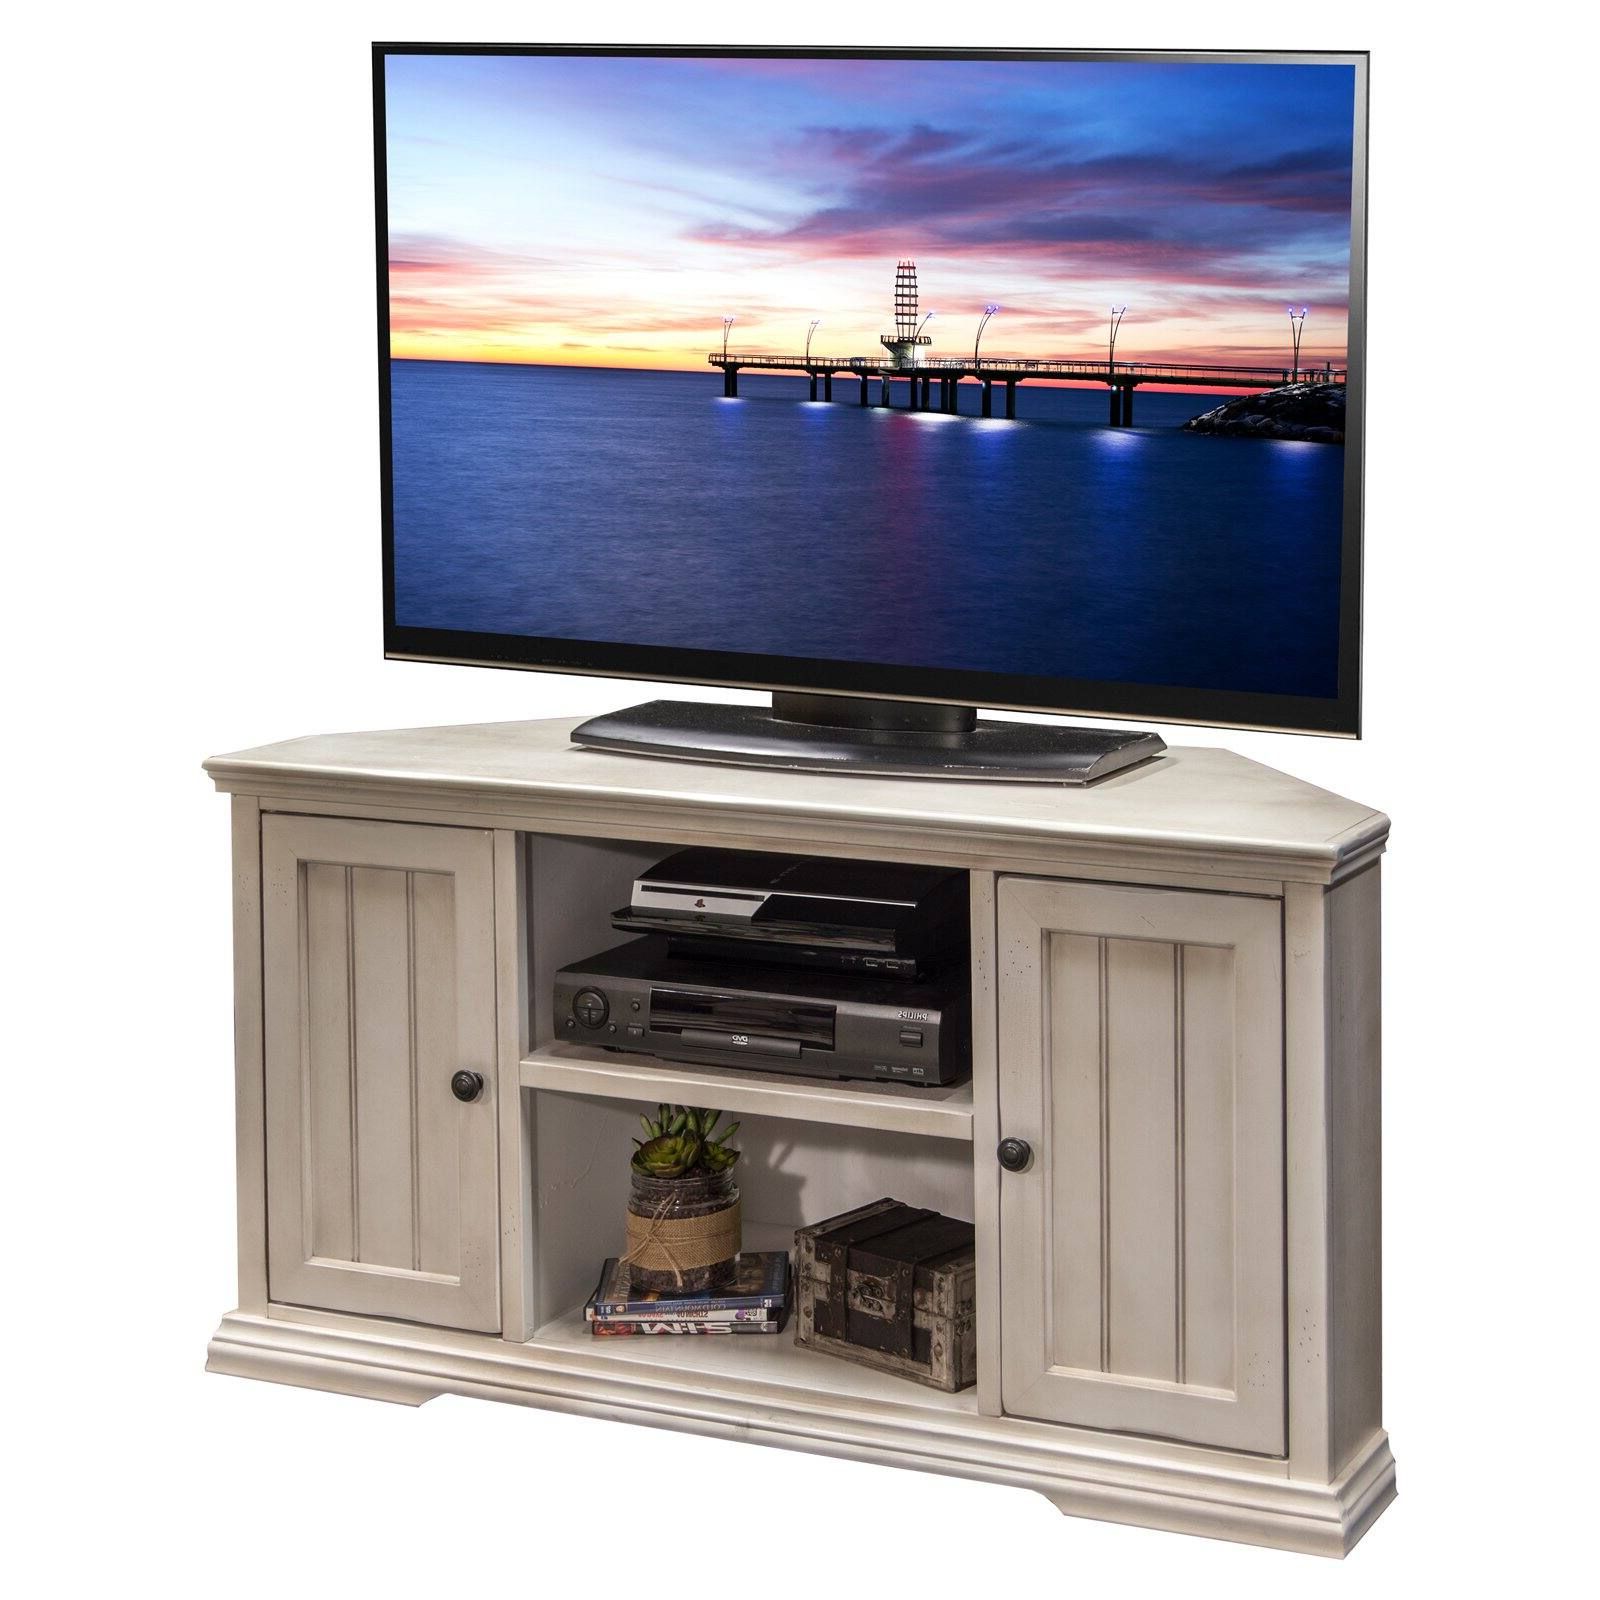 Legends Furniture Riverton 50 In. Tv Stand – Walmart Pertaining To Caleah Tv Stands For Tvs Up To 50" (Gallery 3 of 20)